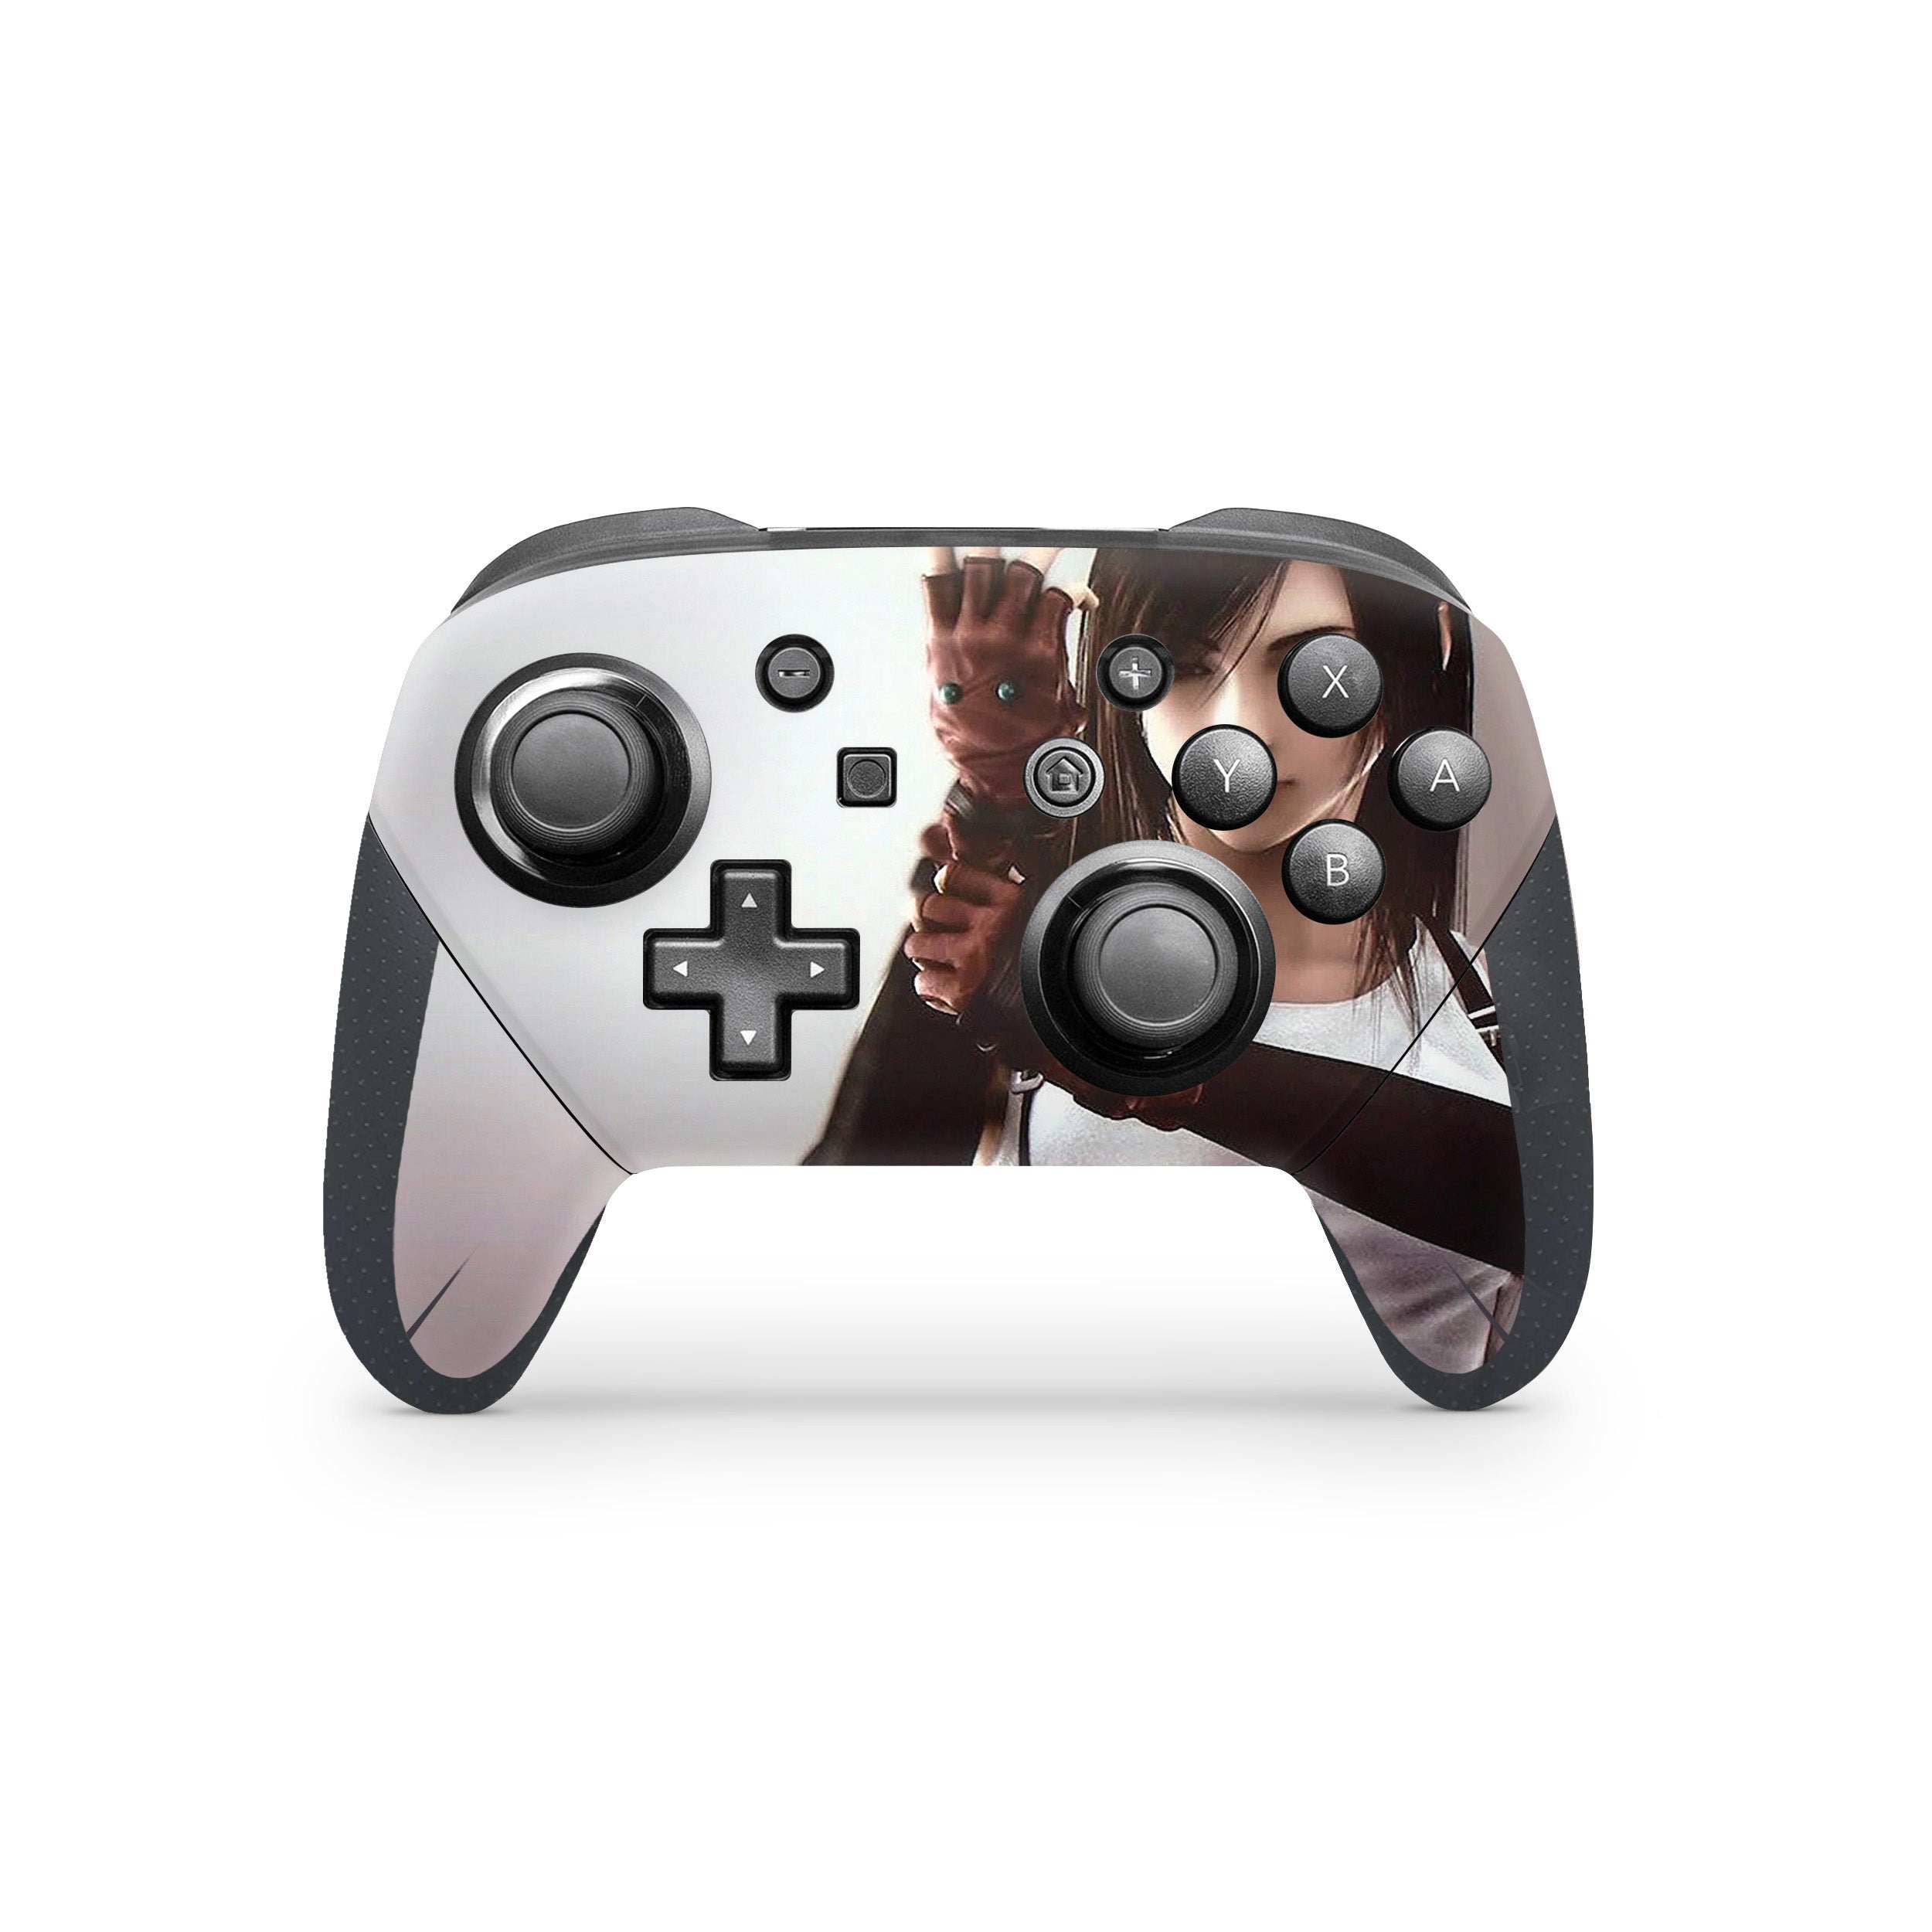 A video game skin featuring a Final Fantasy 7 Tifa design for the Switch Pro Controller.